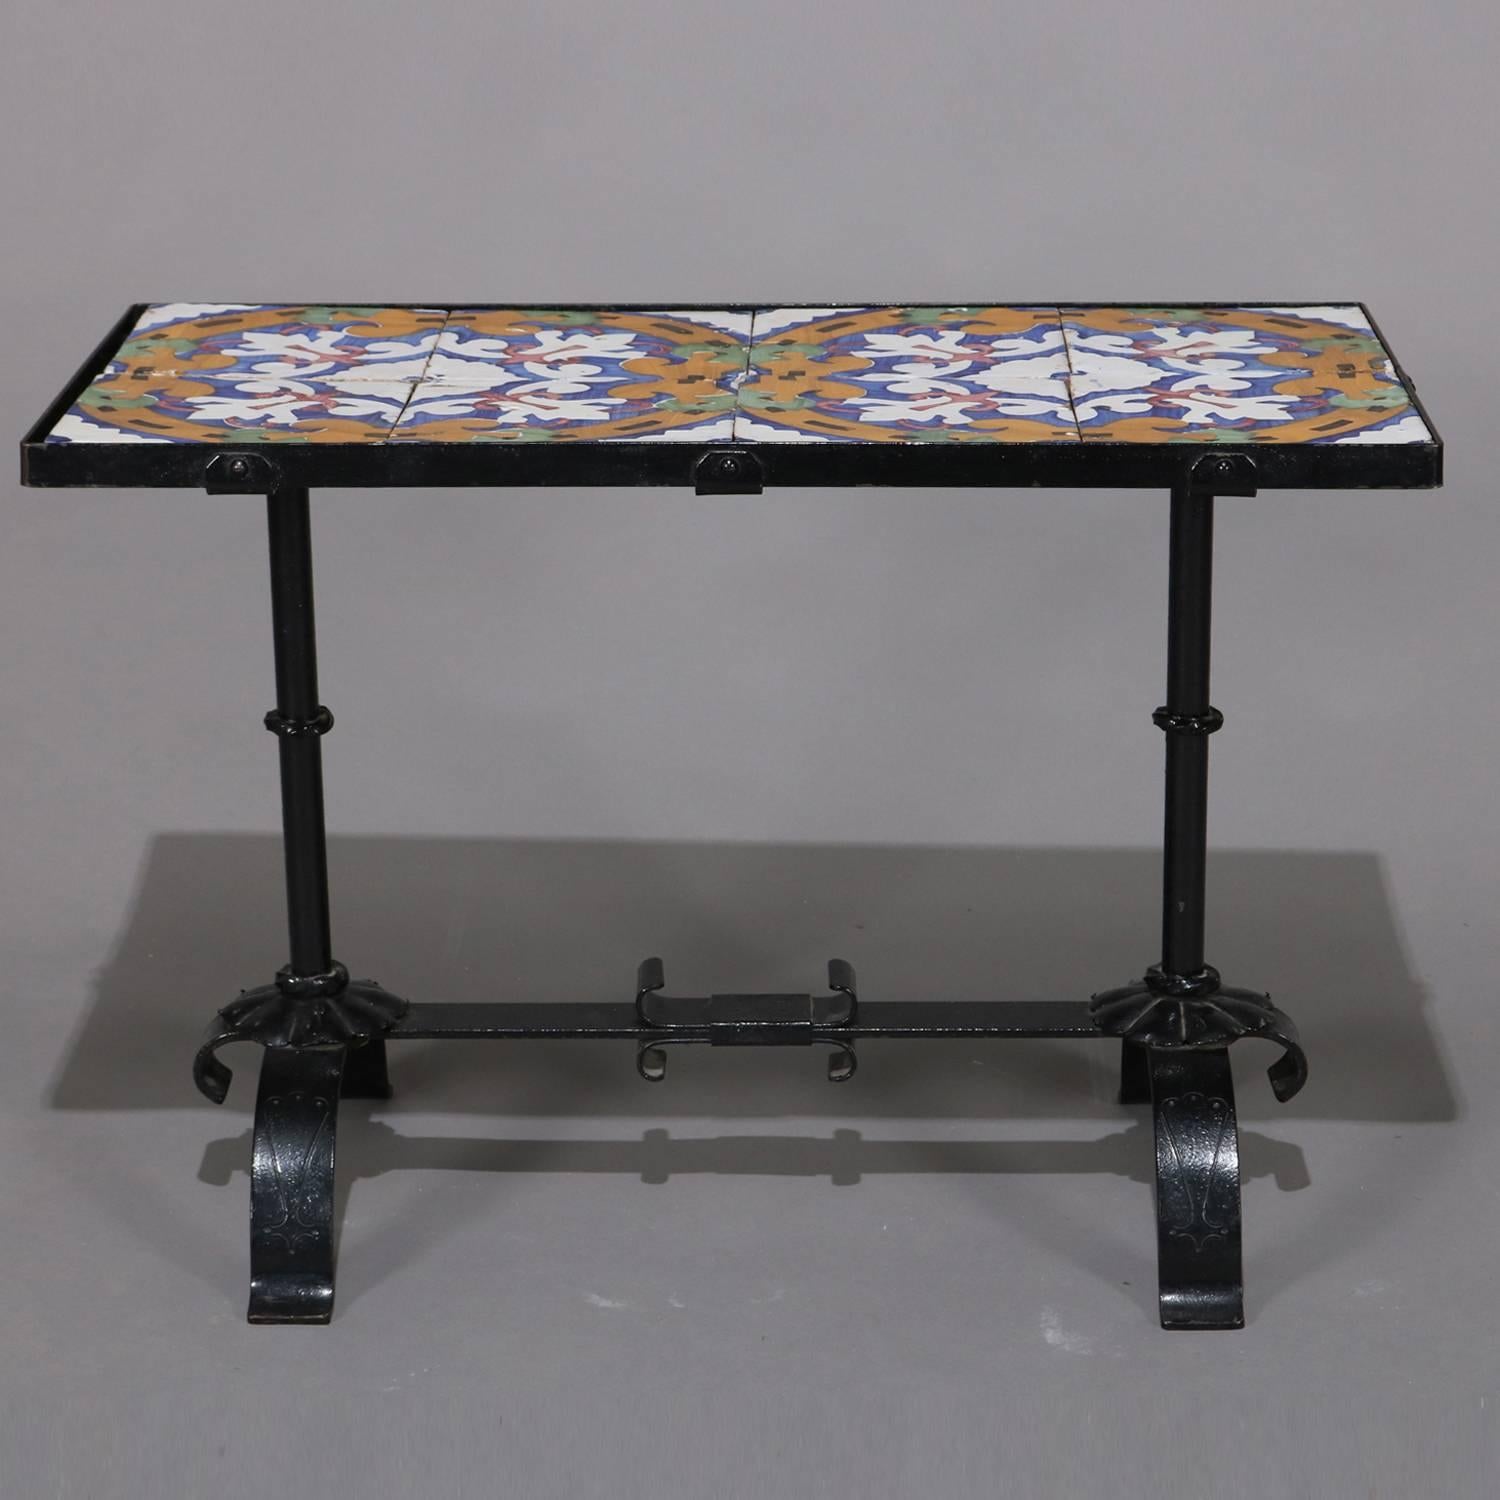 Arts & Crafts Yellin school table features wrought iron construction in trestle form with California stylized floral enameled tile top, circa 1920.

Measures: 22